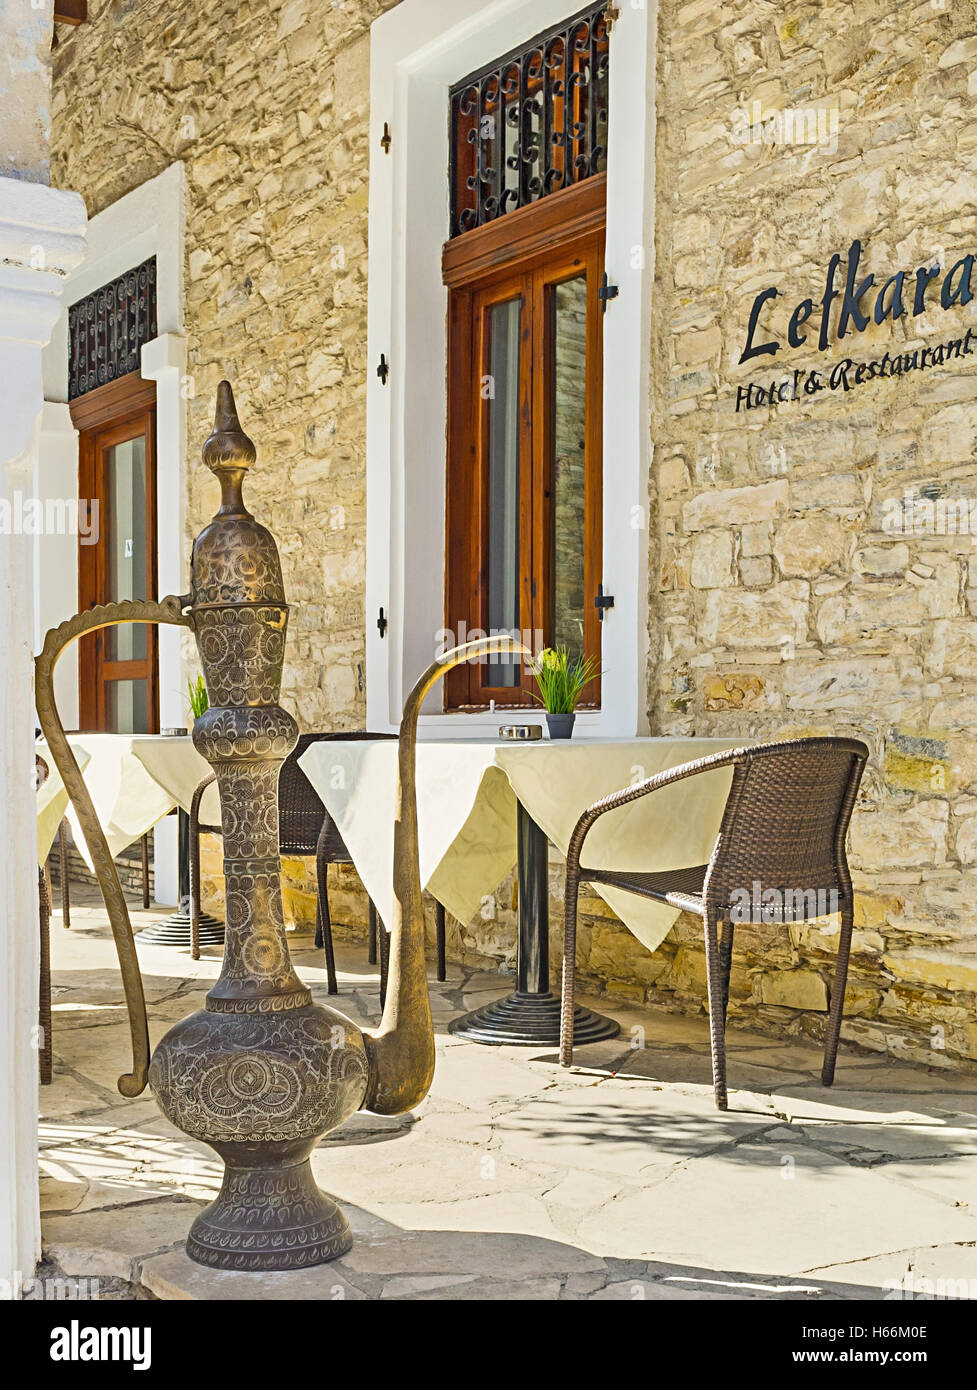 The traditional arabic coffee pot stands next to the entrance of the central restaurant of Lefkara, Cyprus. Stock Photo